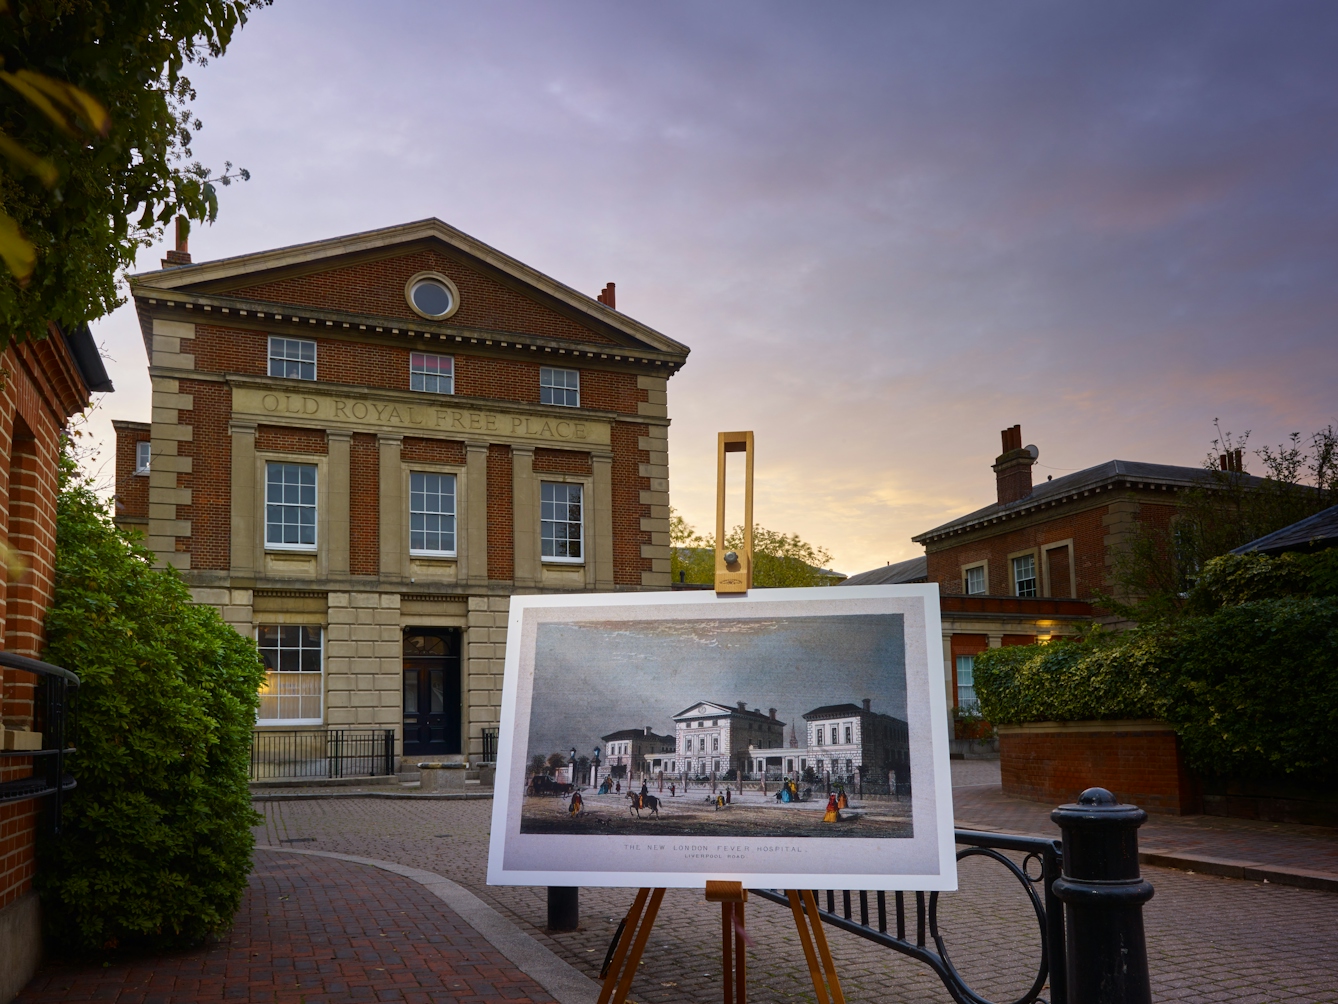 Photograph of the former New London Fever Hospital with an historical image of the hospital displayed in front of it on a wooden artist's easel.